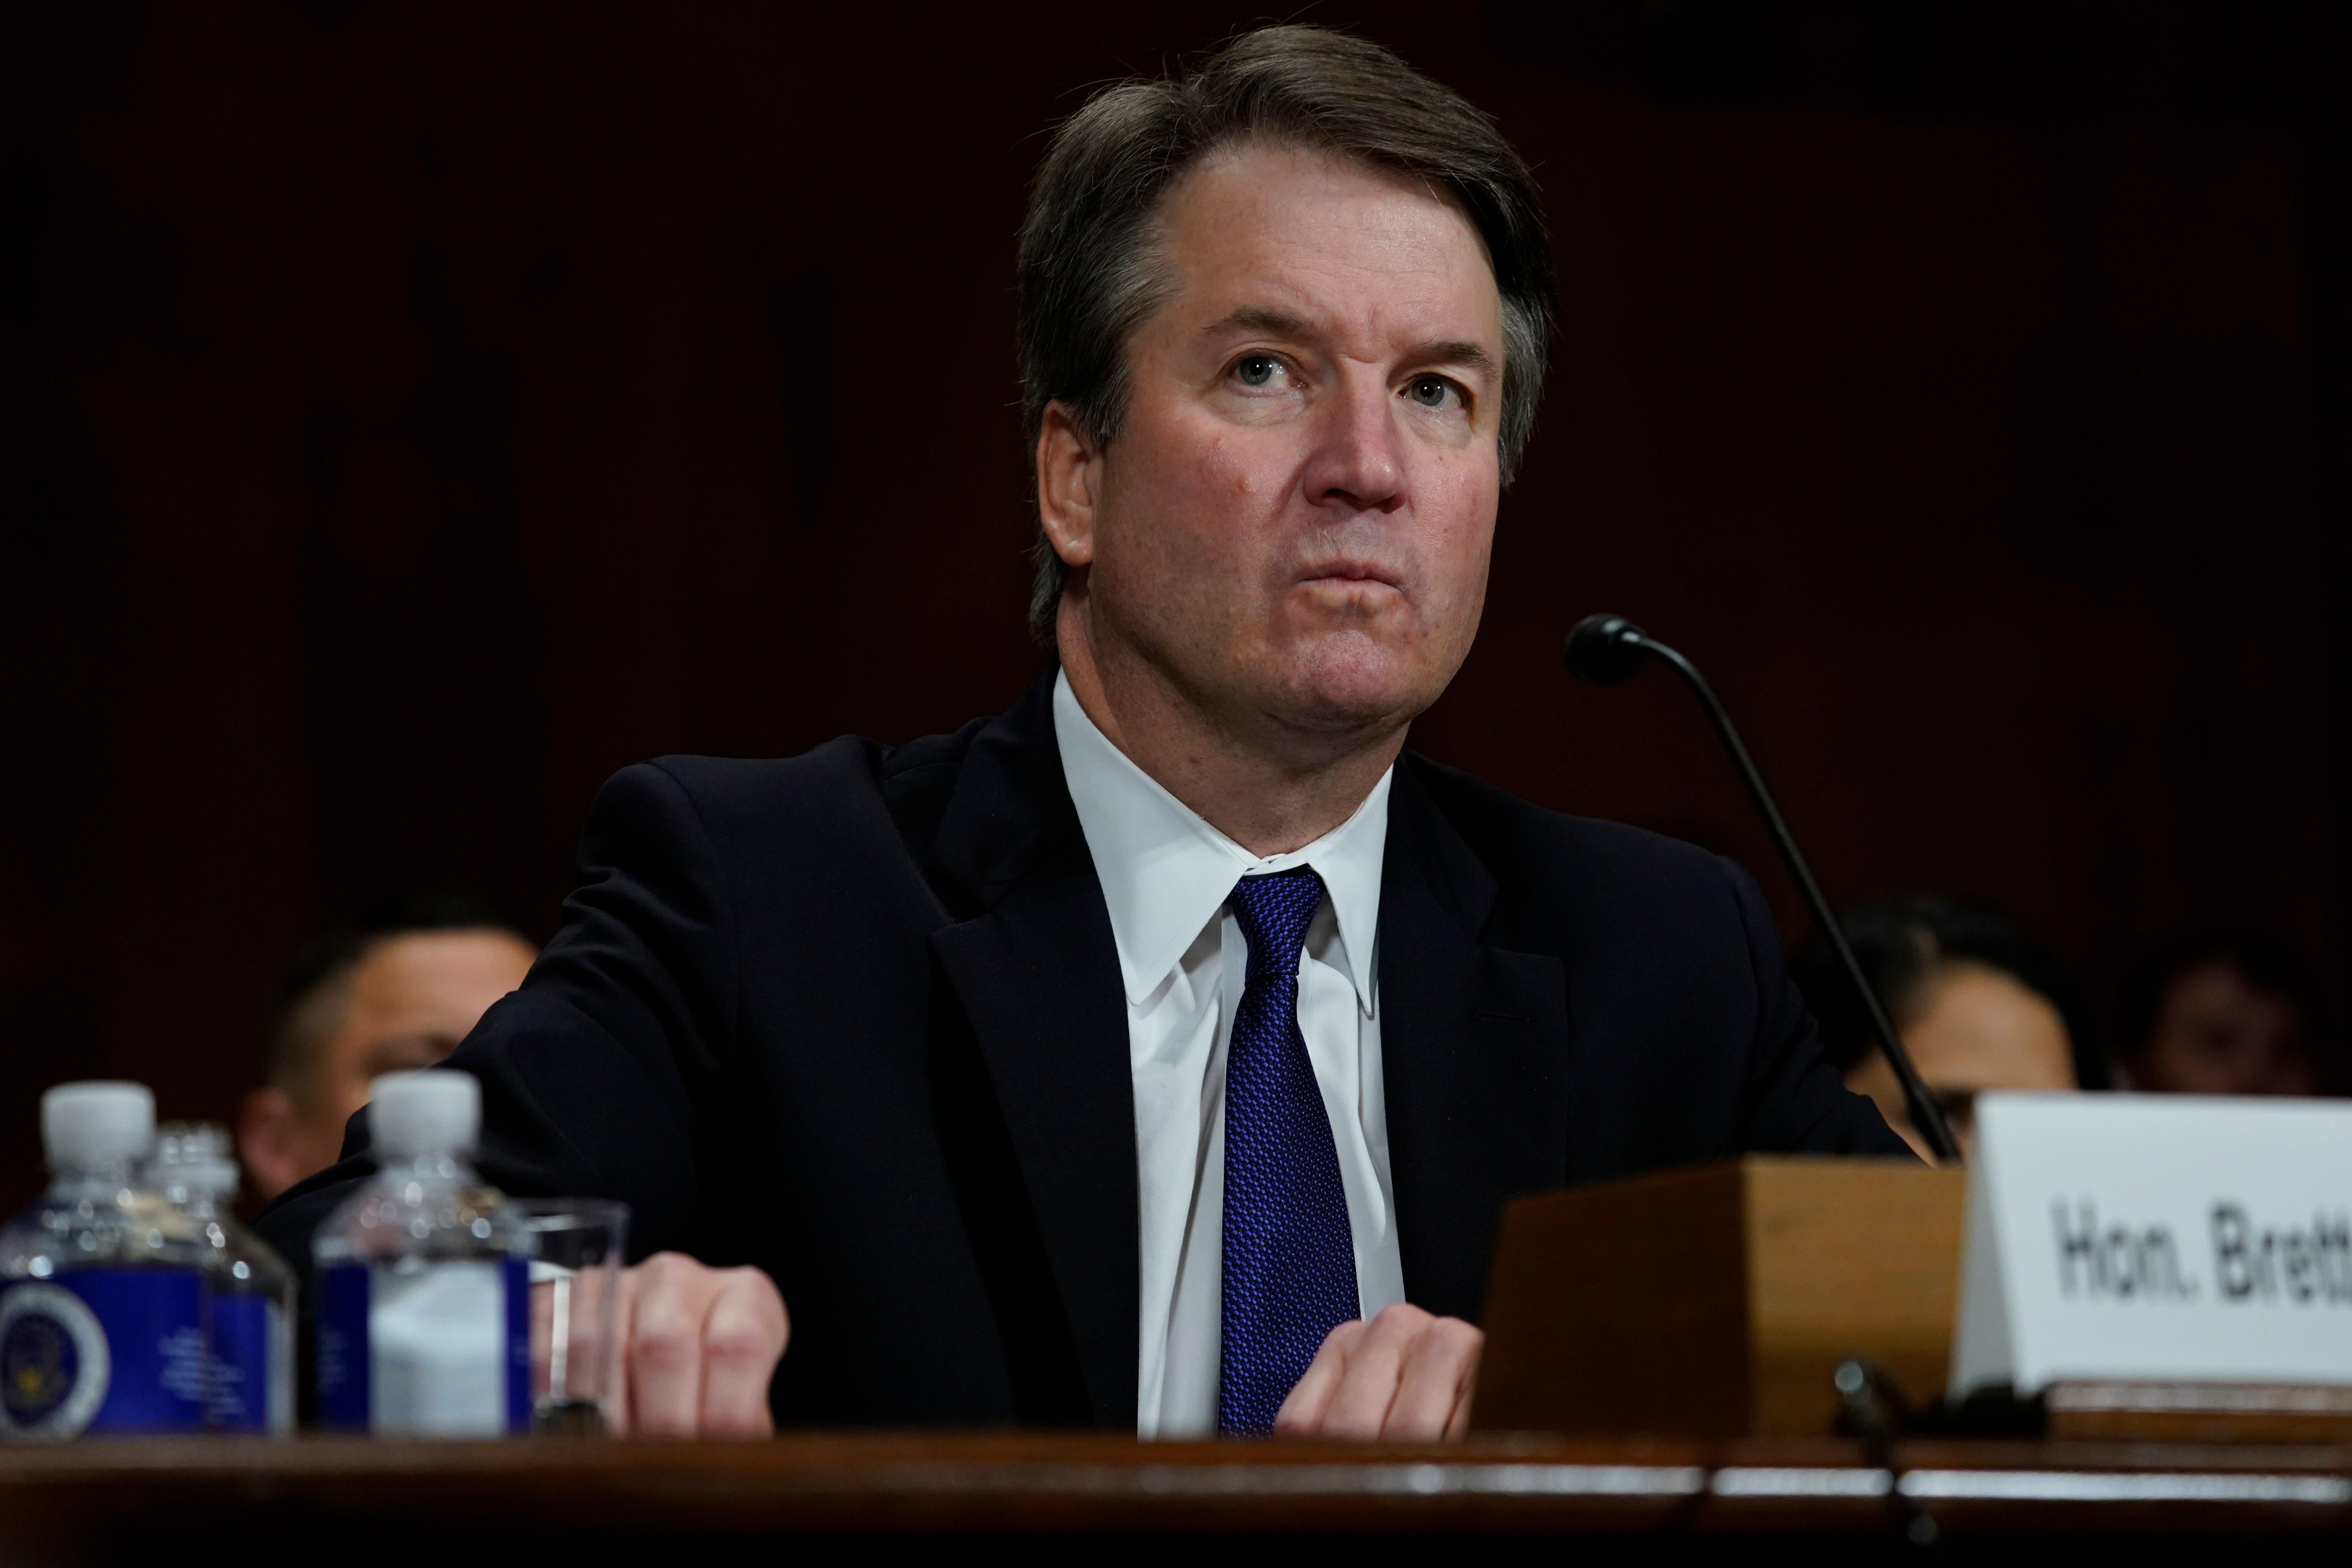 Supreme court nominee Brett Kavanaugh looks frustrated while sitting before the committee.